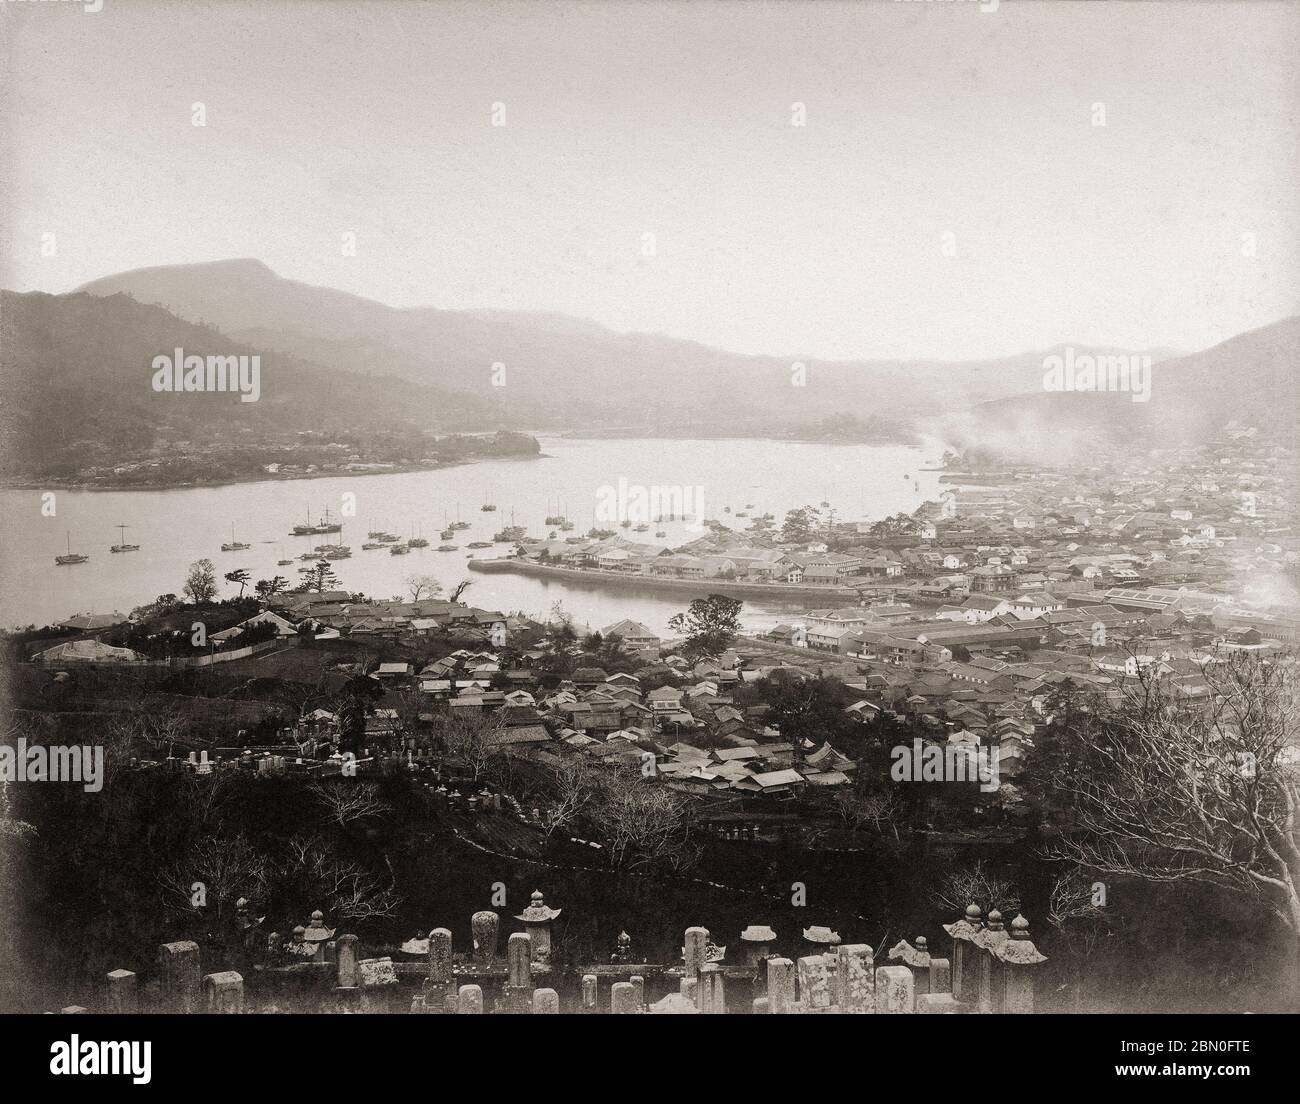 [ 1870s Japan - Nagasaki Harbor ] —   View on the Oura Foreign Settlement, Dejima and Nagasaki Harbor from a graveyard at the hillside above Juzenji temple (十善寺上の山) in Nagasaki, sometime between 1869 (Meiji 2) and 1876 (Meiji 9).  Beyond Dejima, the harbor stretches all the way to the Urakami area. This was later reclaimed, greatly reducing the size of the bay.  19th century vintage albumen photograph. Stock Photo